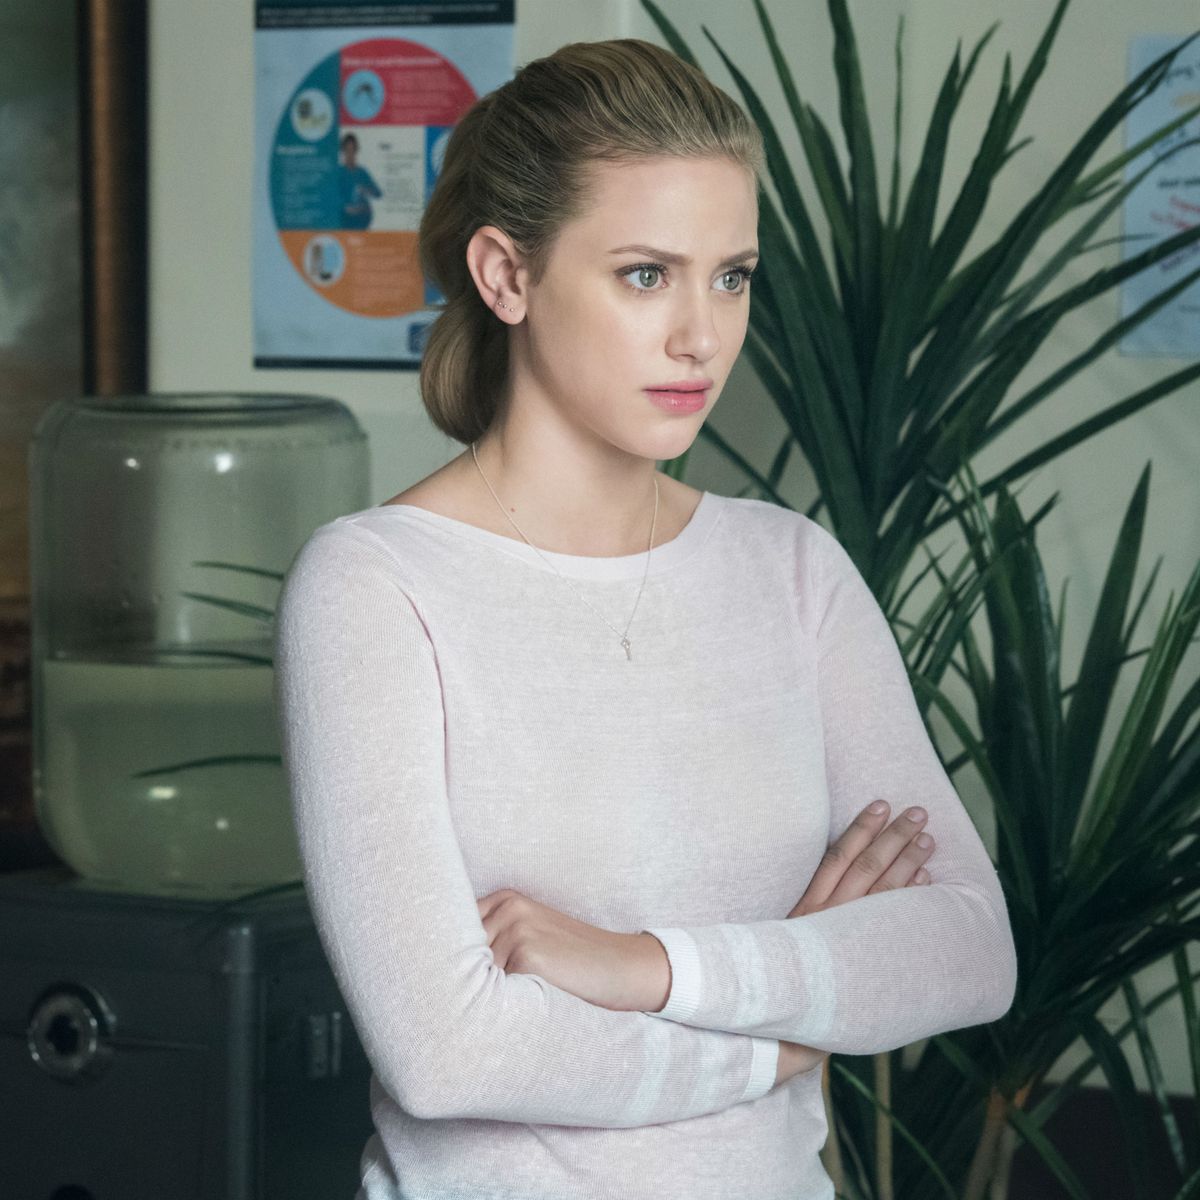 Riverdale star Lili Reinhart says Barchie fans will be 'well fed